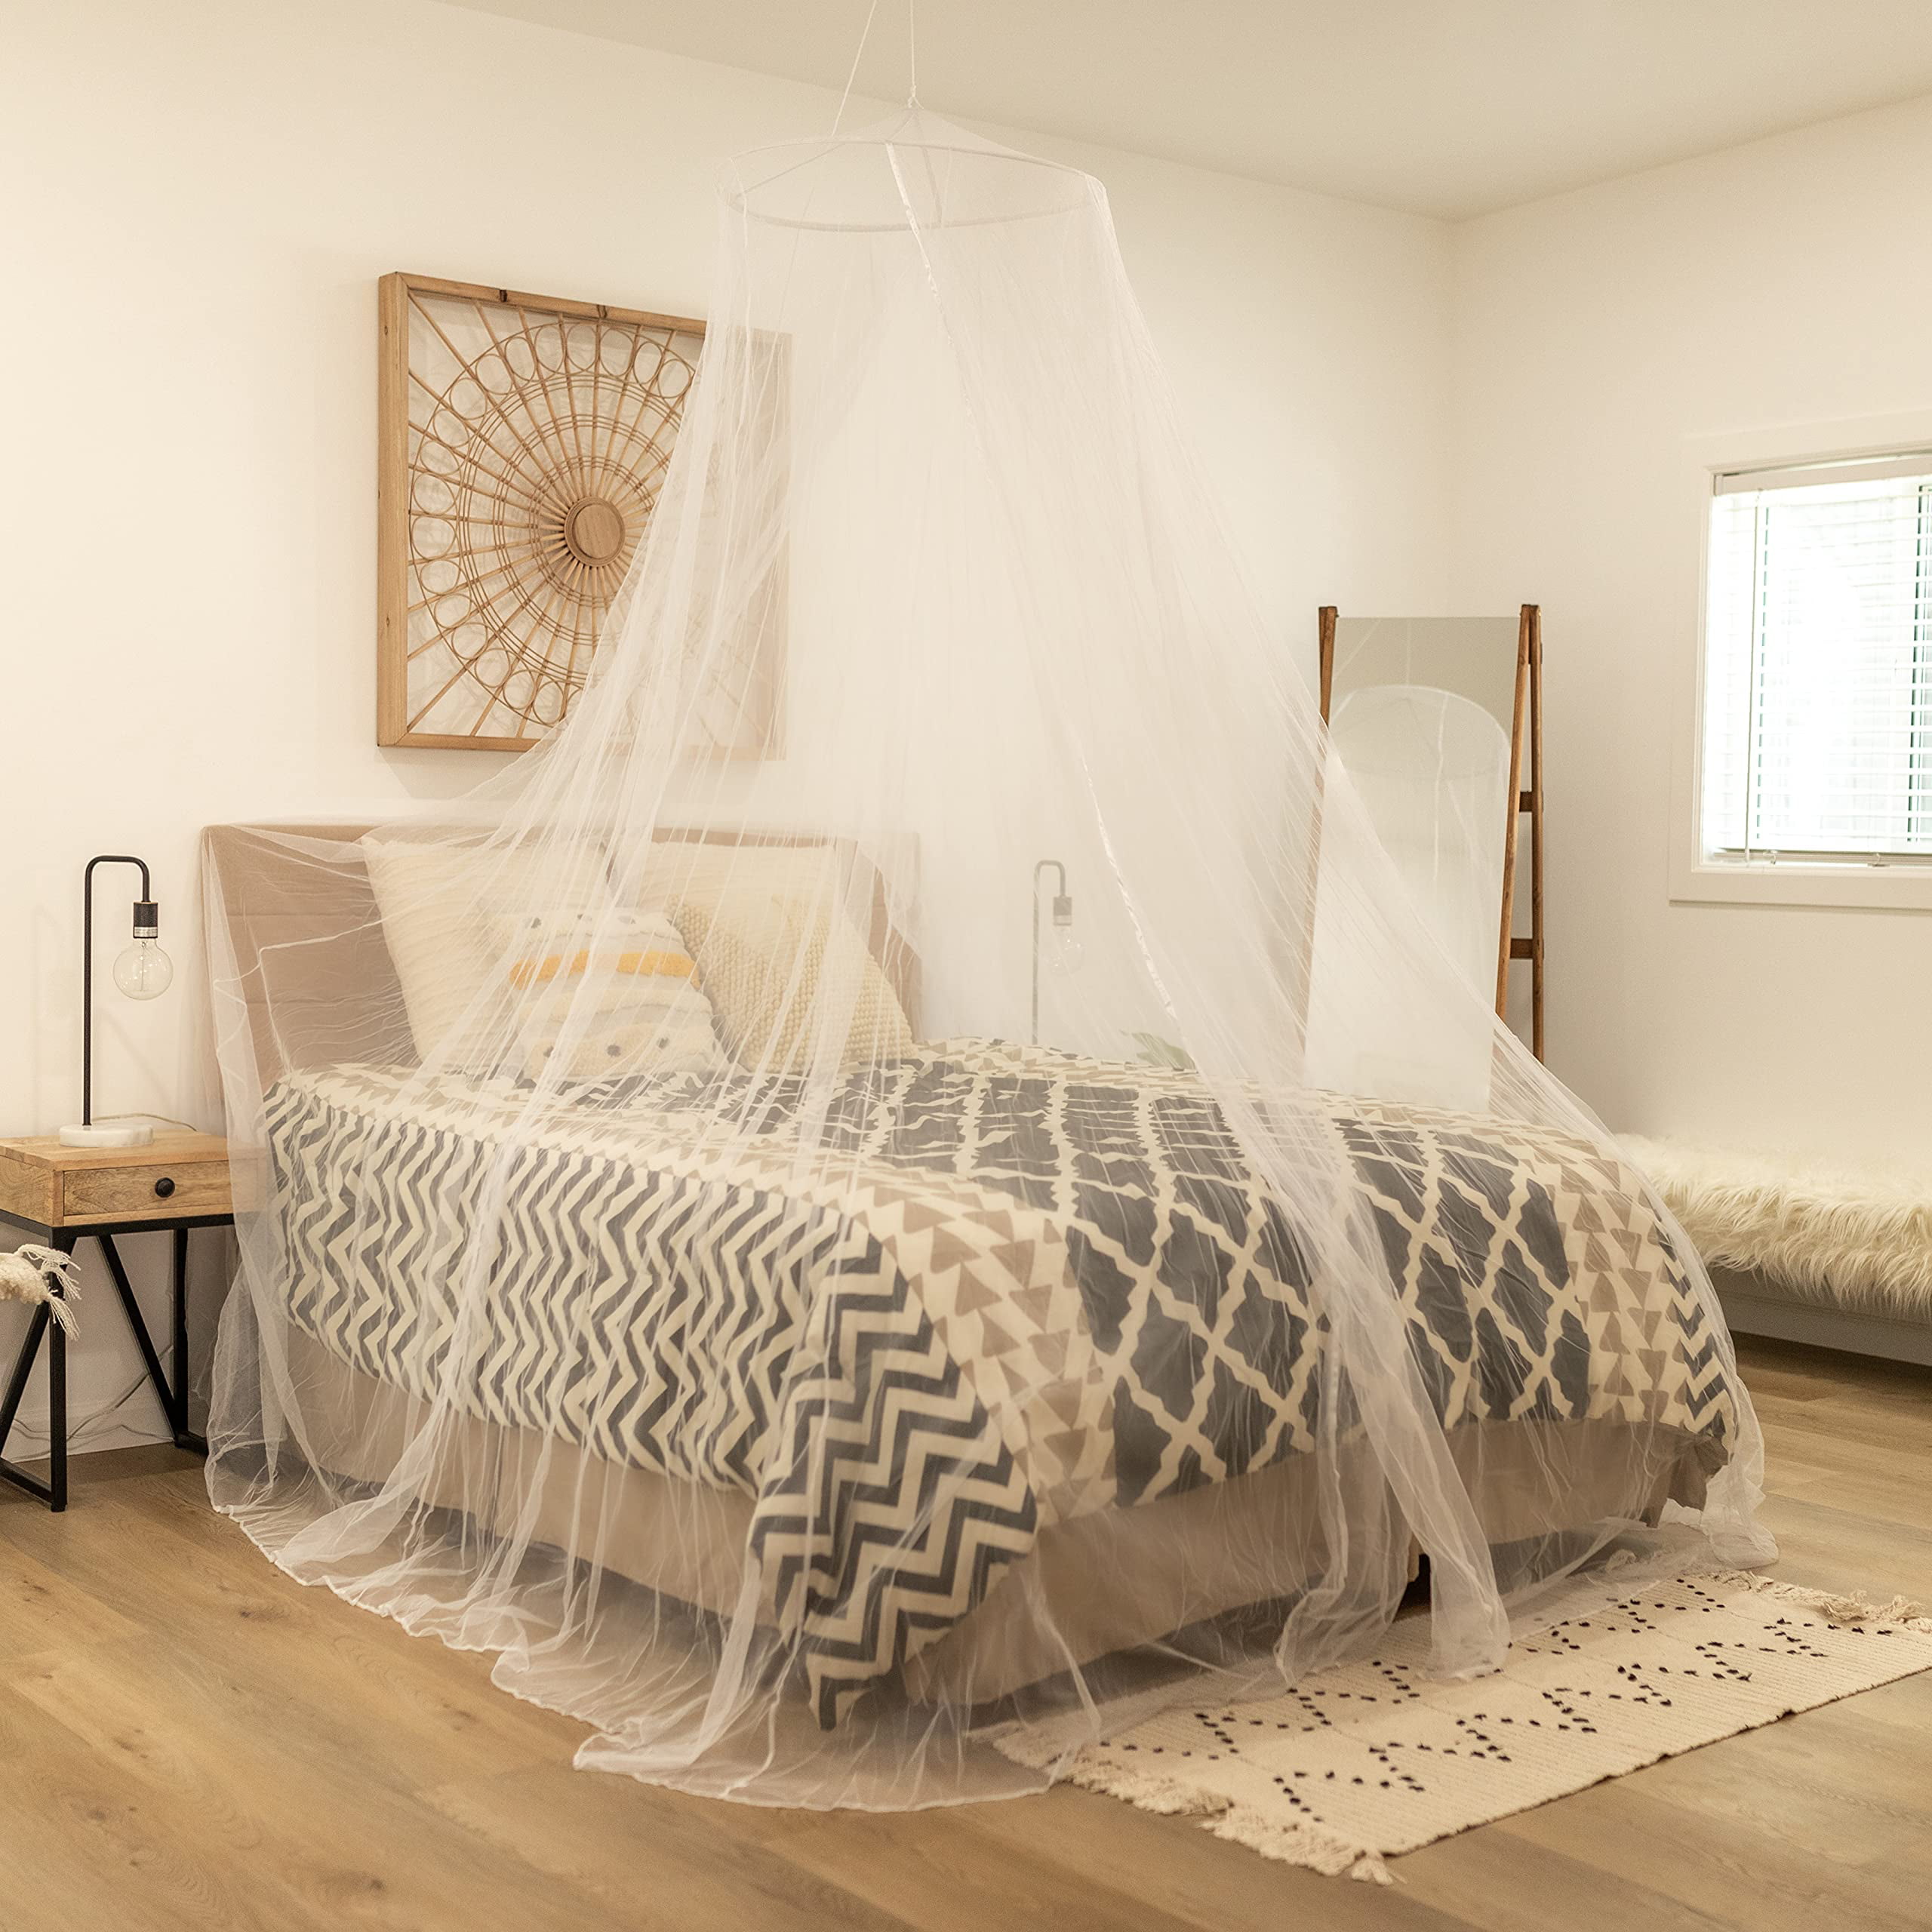 Twin to Double Size Quick Easy Installation No Chemicals Added EVEN Naturals Luxury MOSQUITO NET for Bed Bed Canopy Curtain Netting Large: for Single Finest Holes: Mesh 380 1 Entry Storage Bag